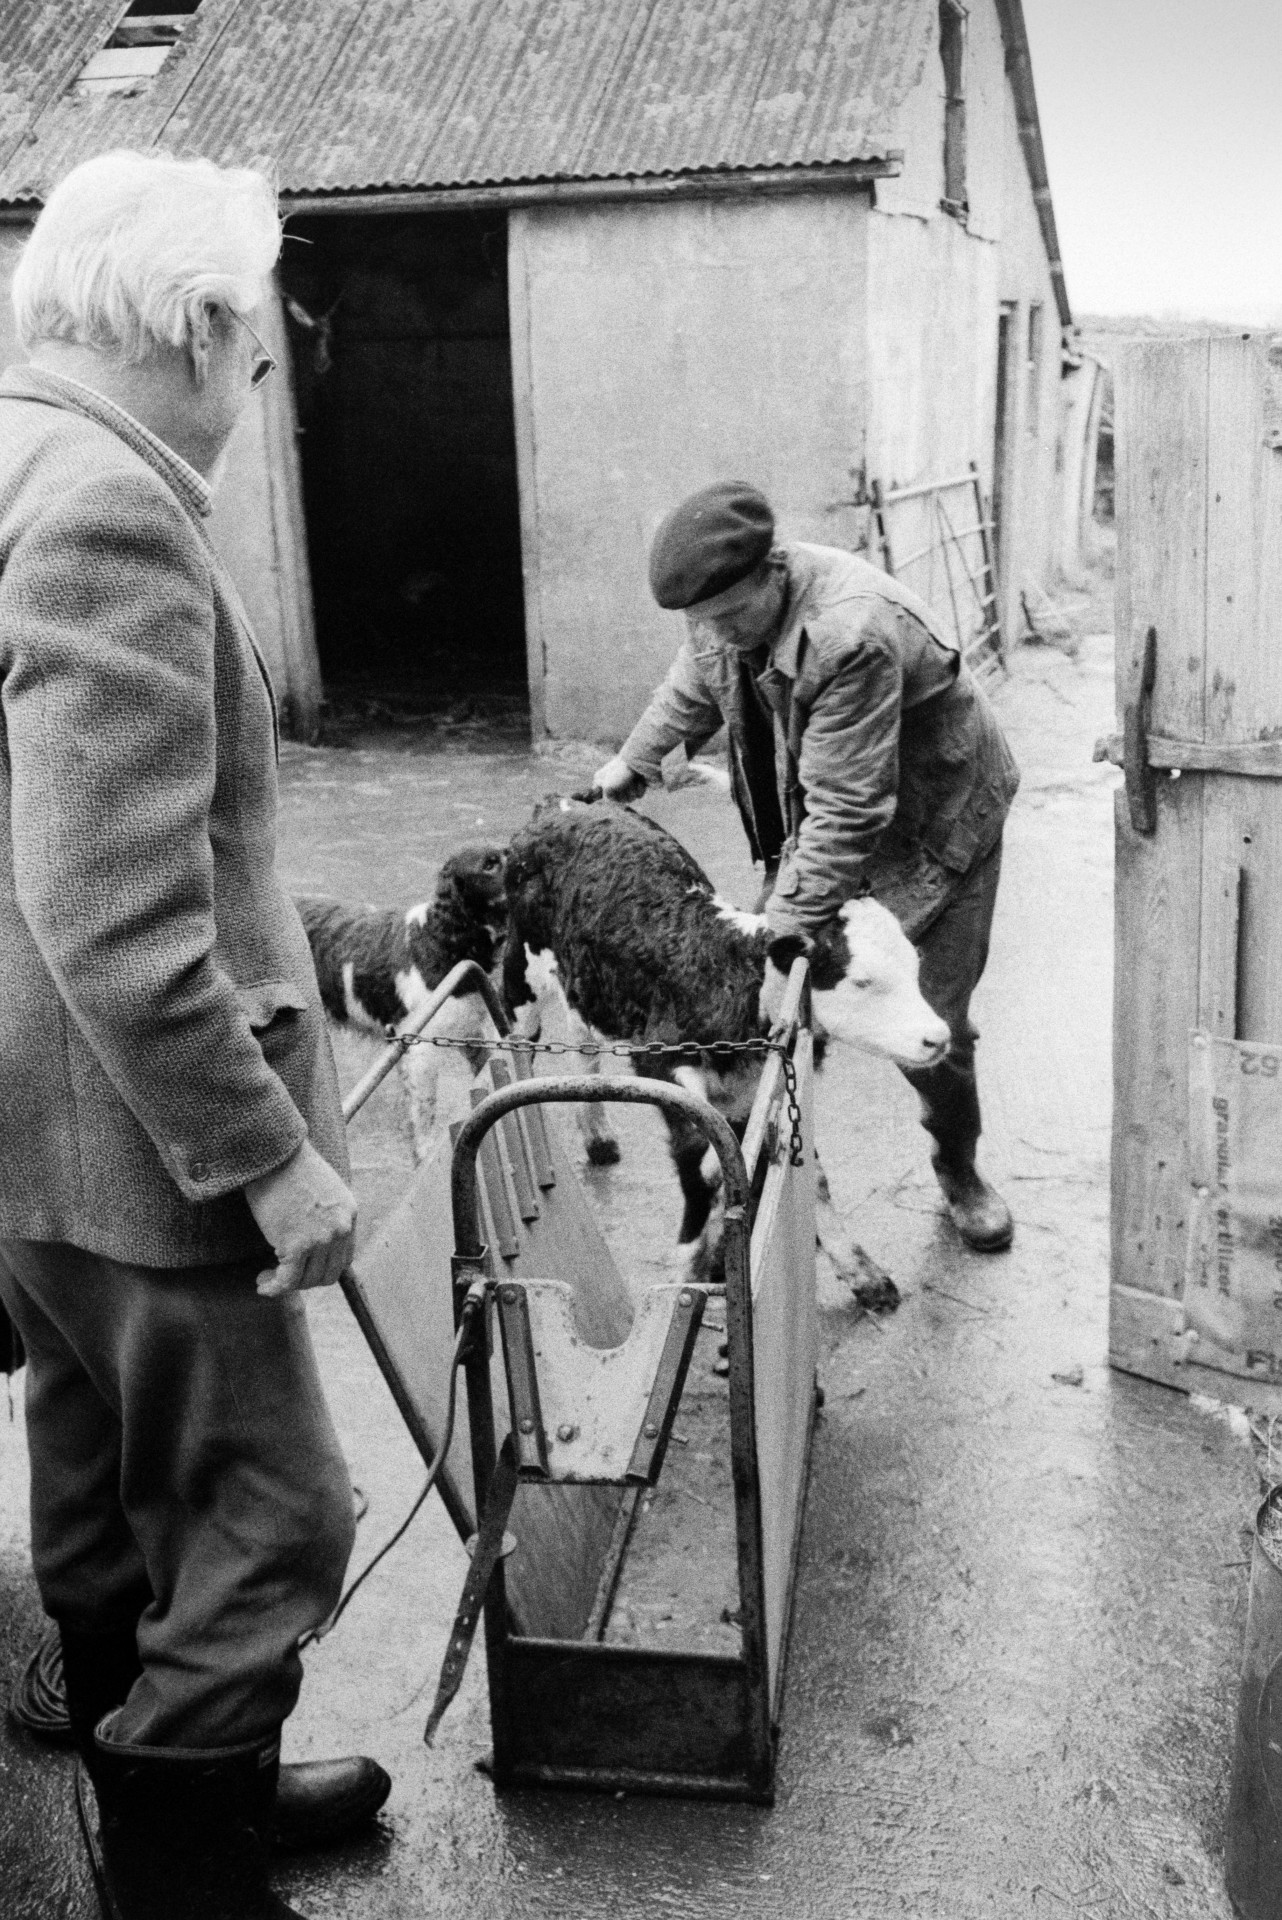 Ivor Bourne coaxing a calf into a cattle crush so a vet can de-horn it, at Mill Road Farm, Beaford. A barn and dog can be seen in the background. The farm was also known as Jeffrys.